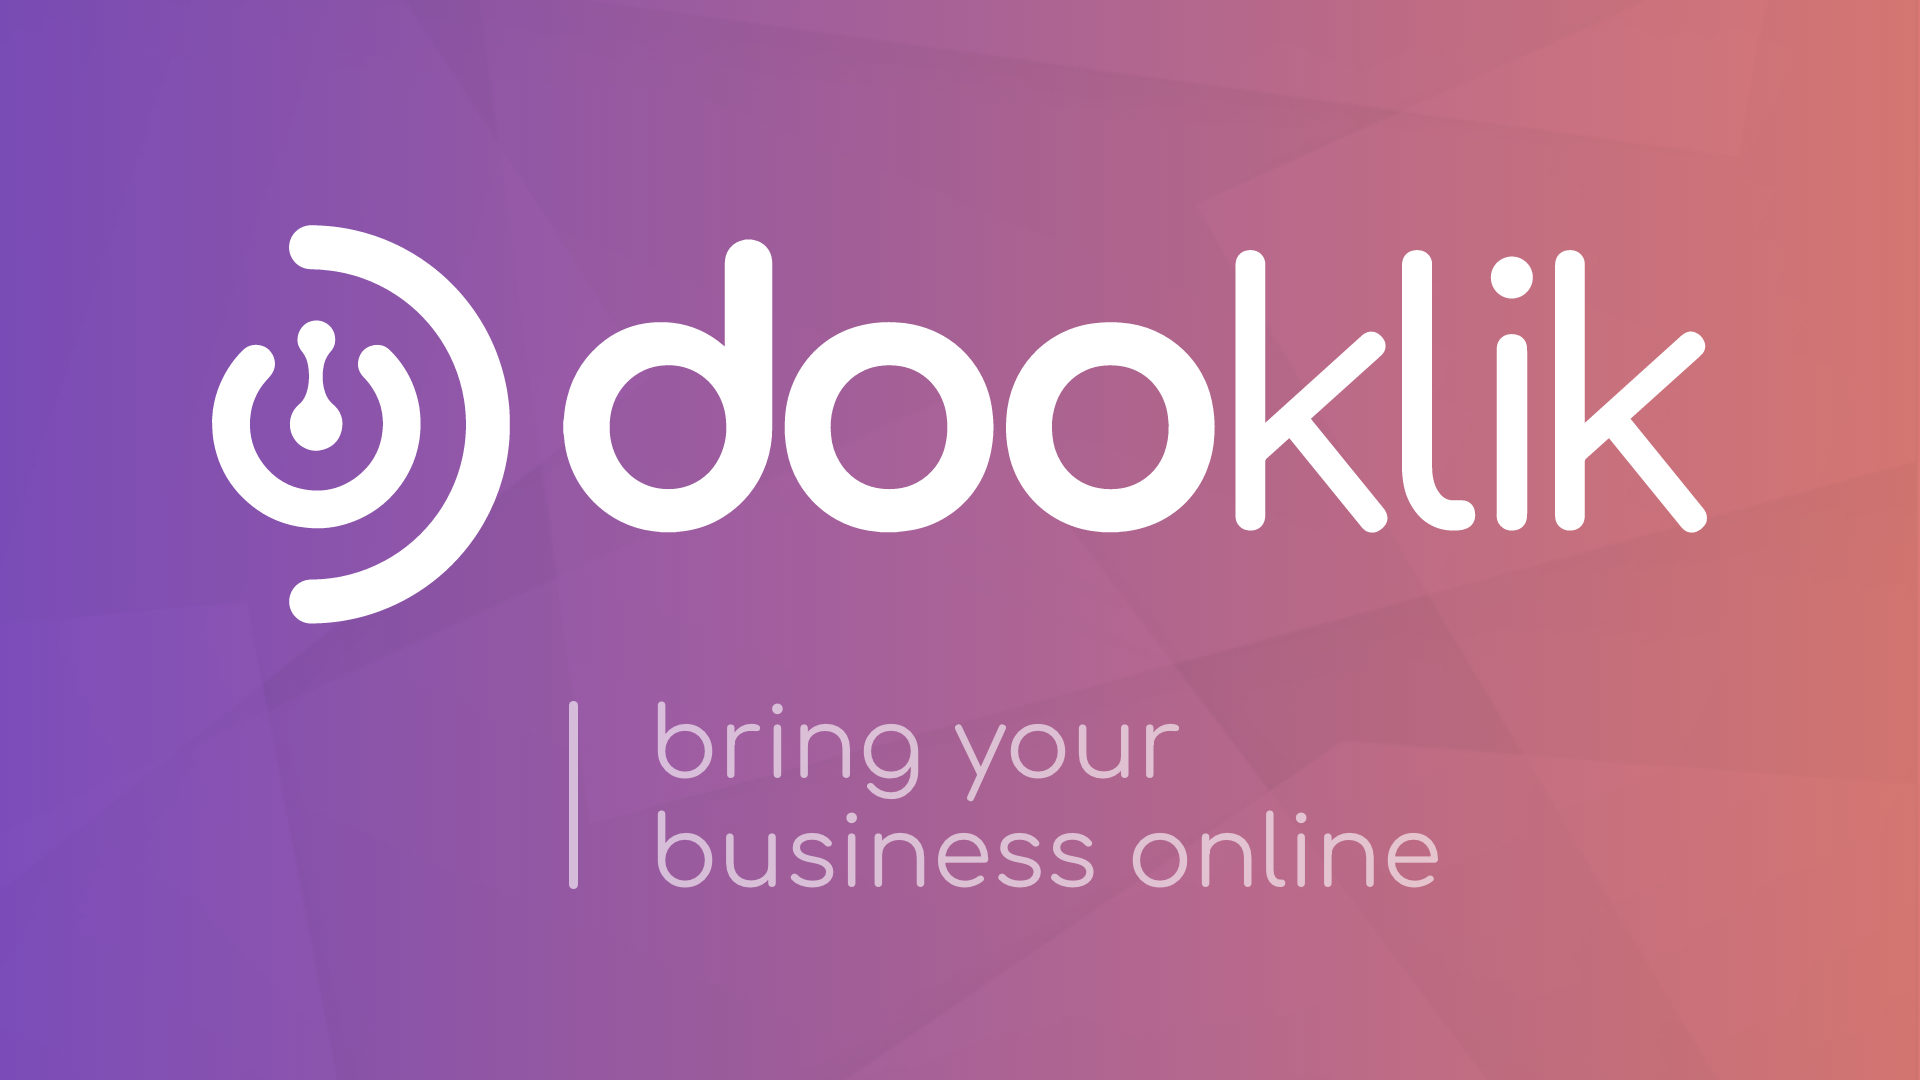 How to place an order on dooklik: